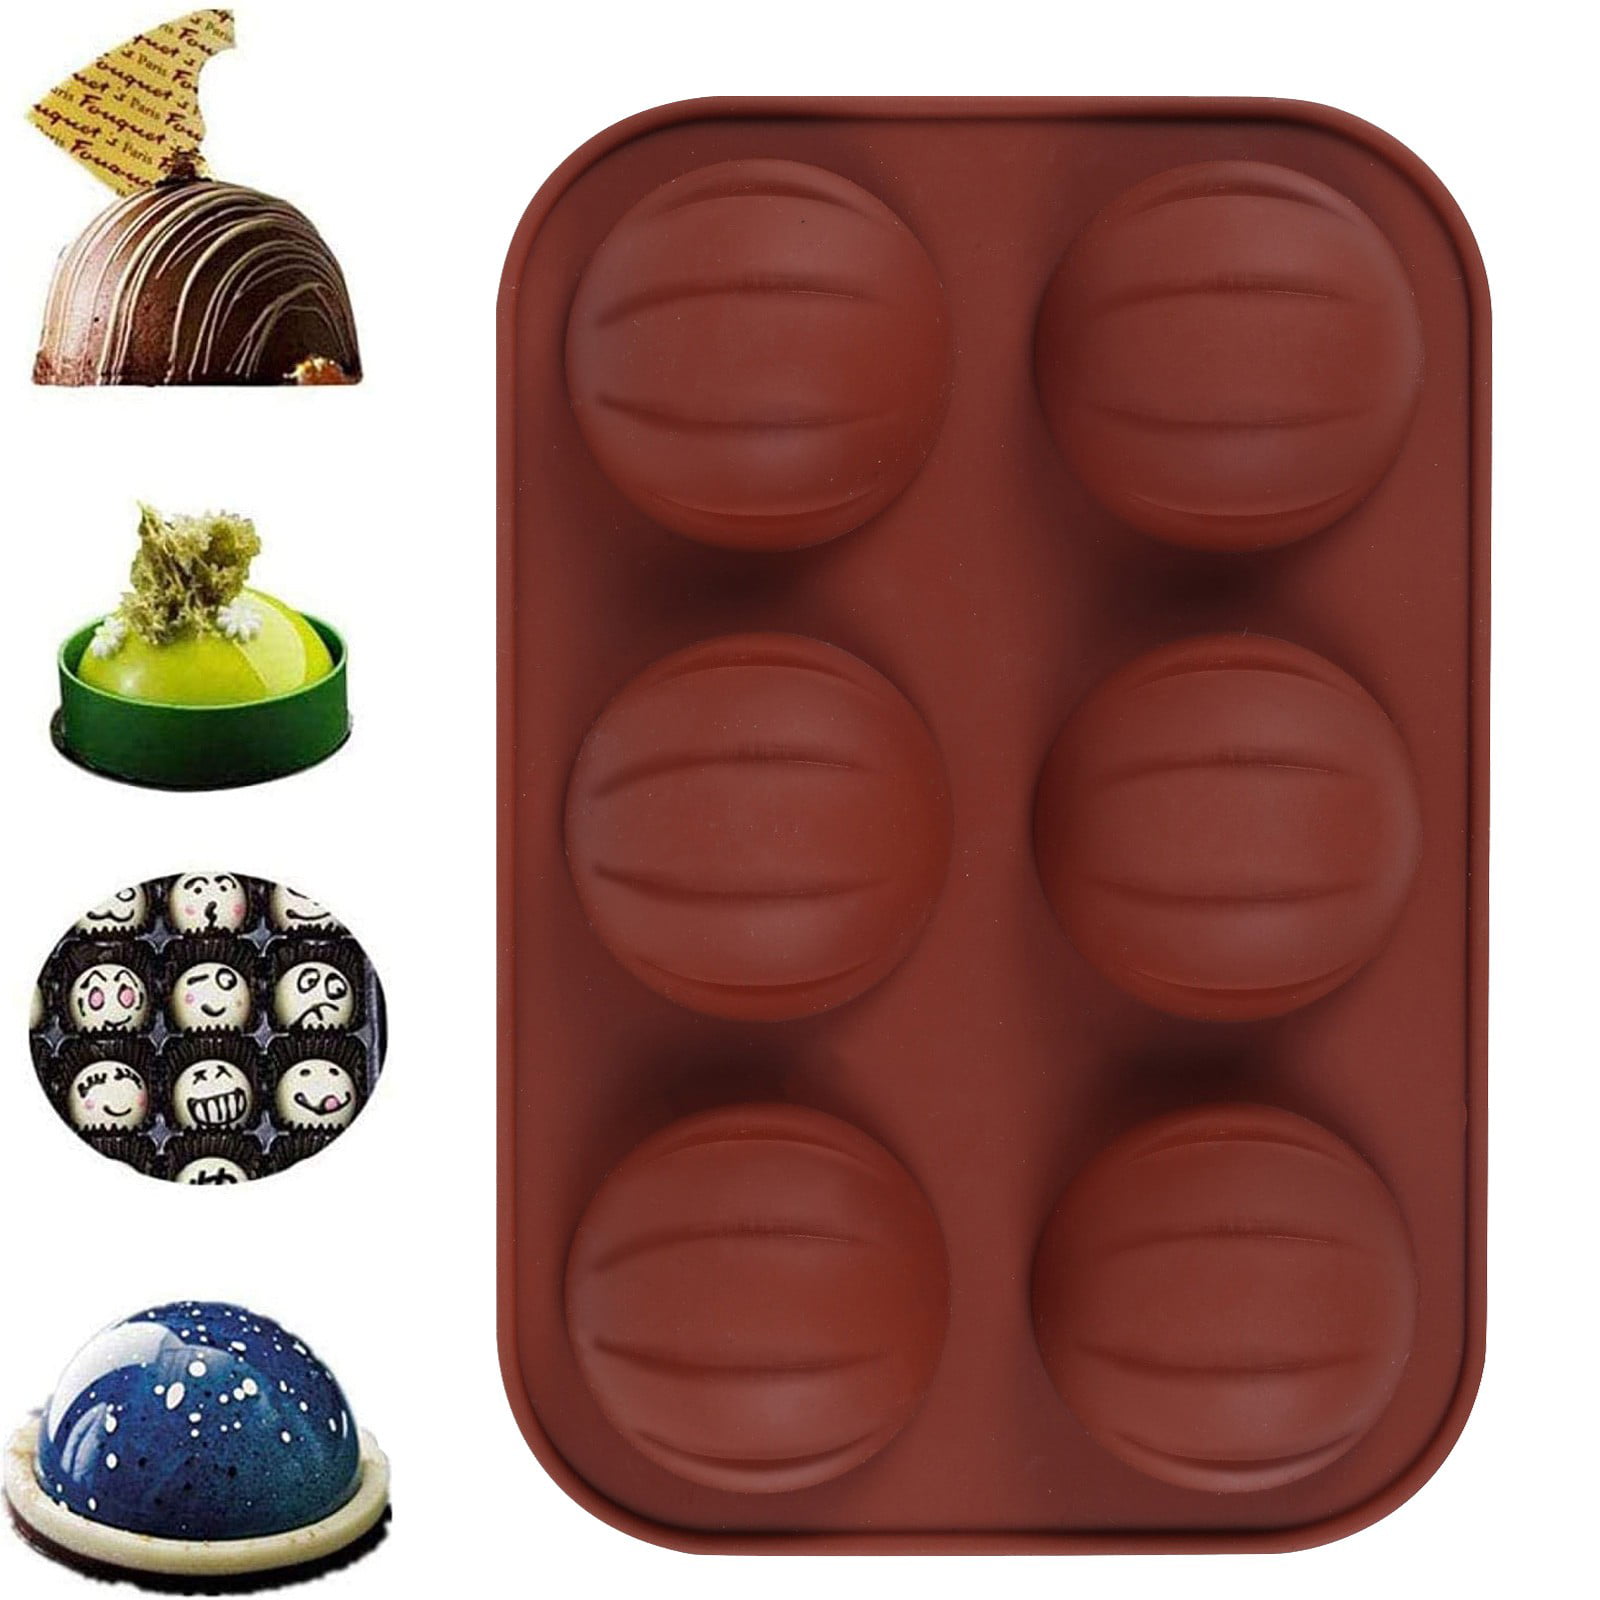 6 Holes Round Half Ball Sphere Silicone Cake Mold Muffin Chocolate Cookie Baking Mould Pan for Jelly Sphere Mold Non Stick Cost-effective 100% Food-grade DIY Festival Party Cake Mold 2